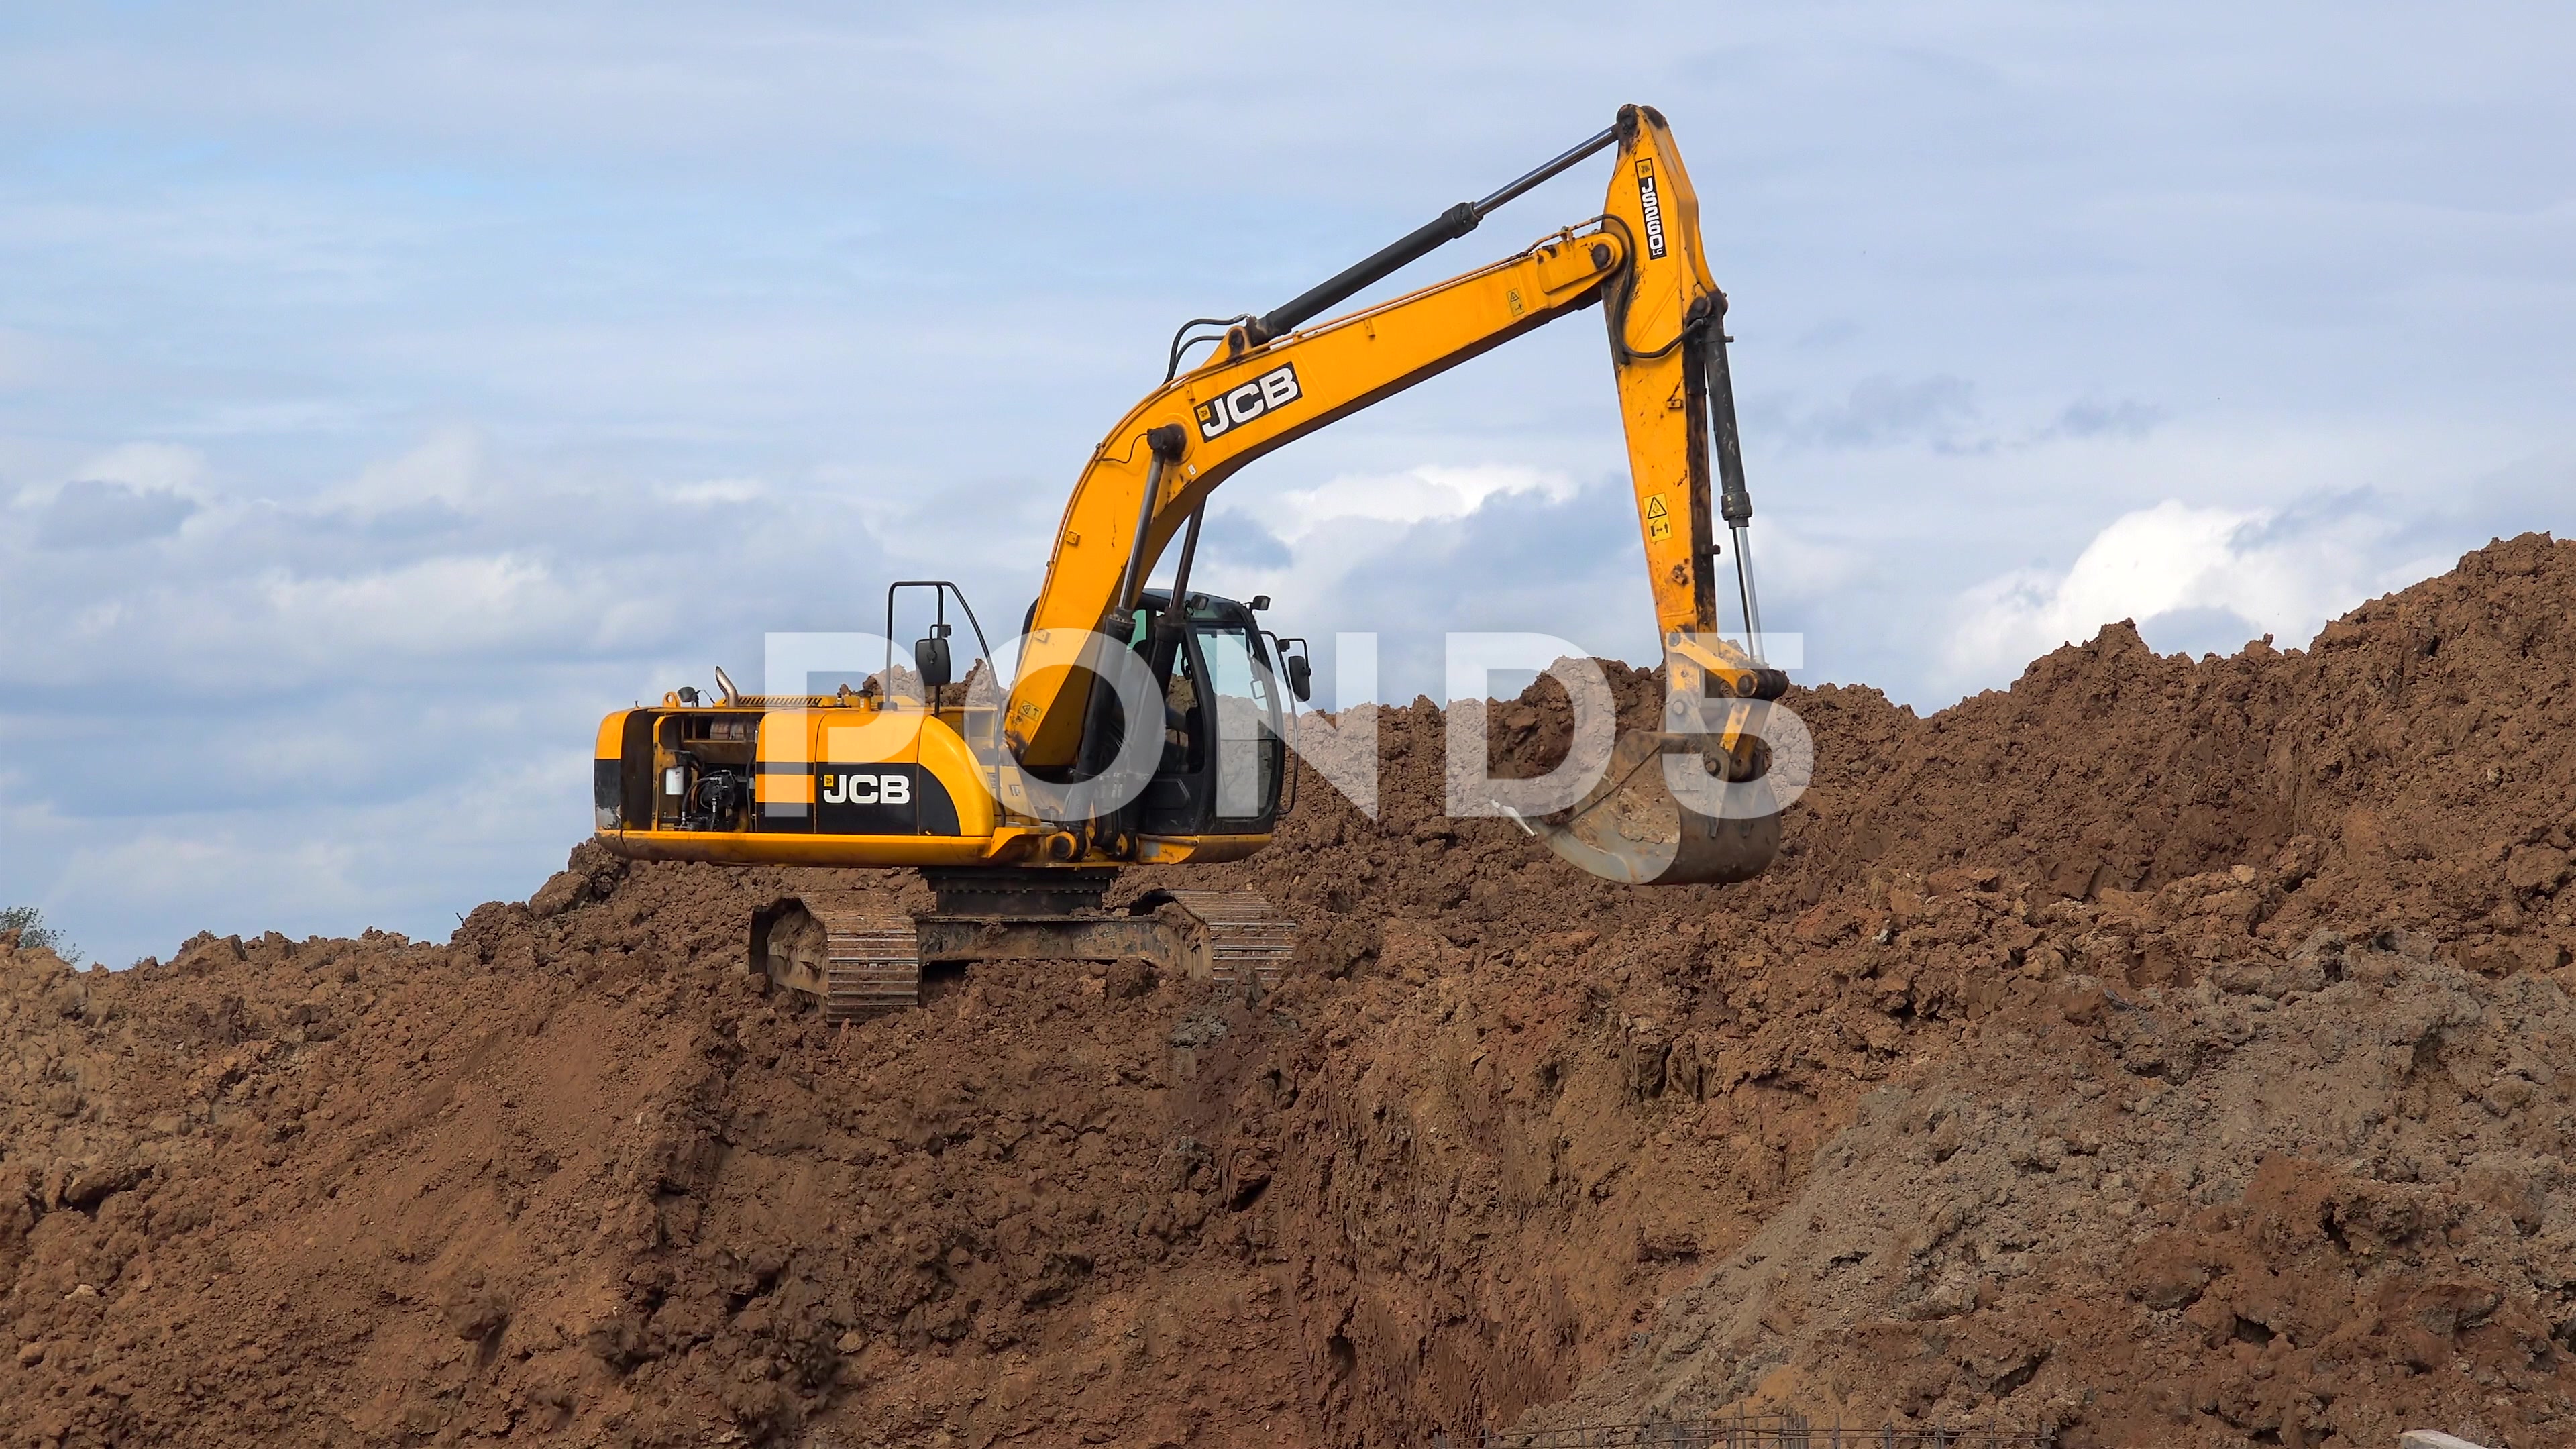 Work Excavator at a construction site. ~ Footage #66909318